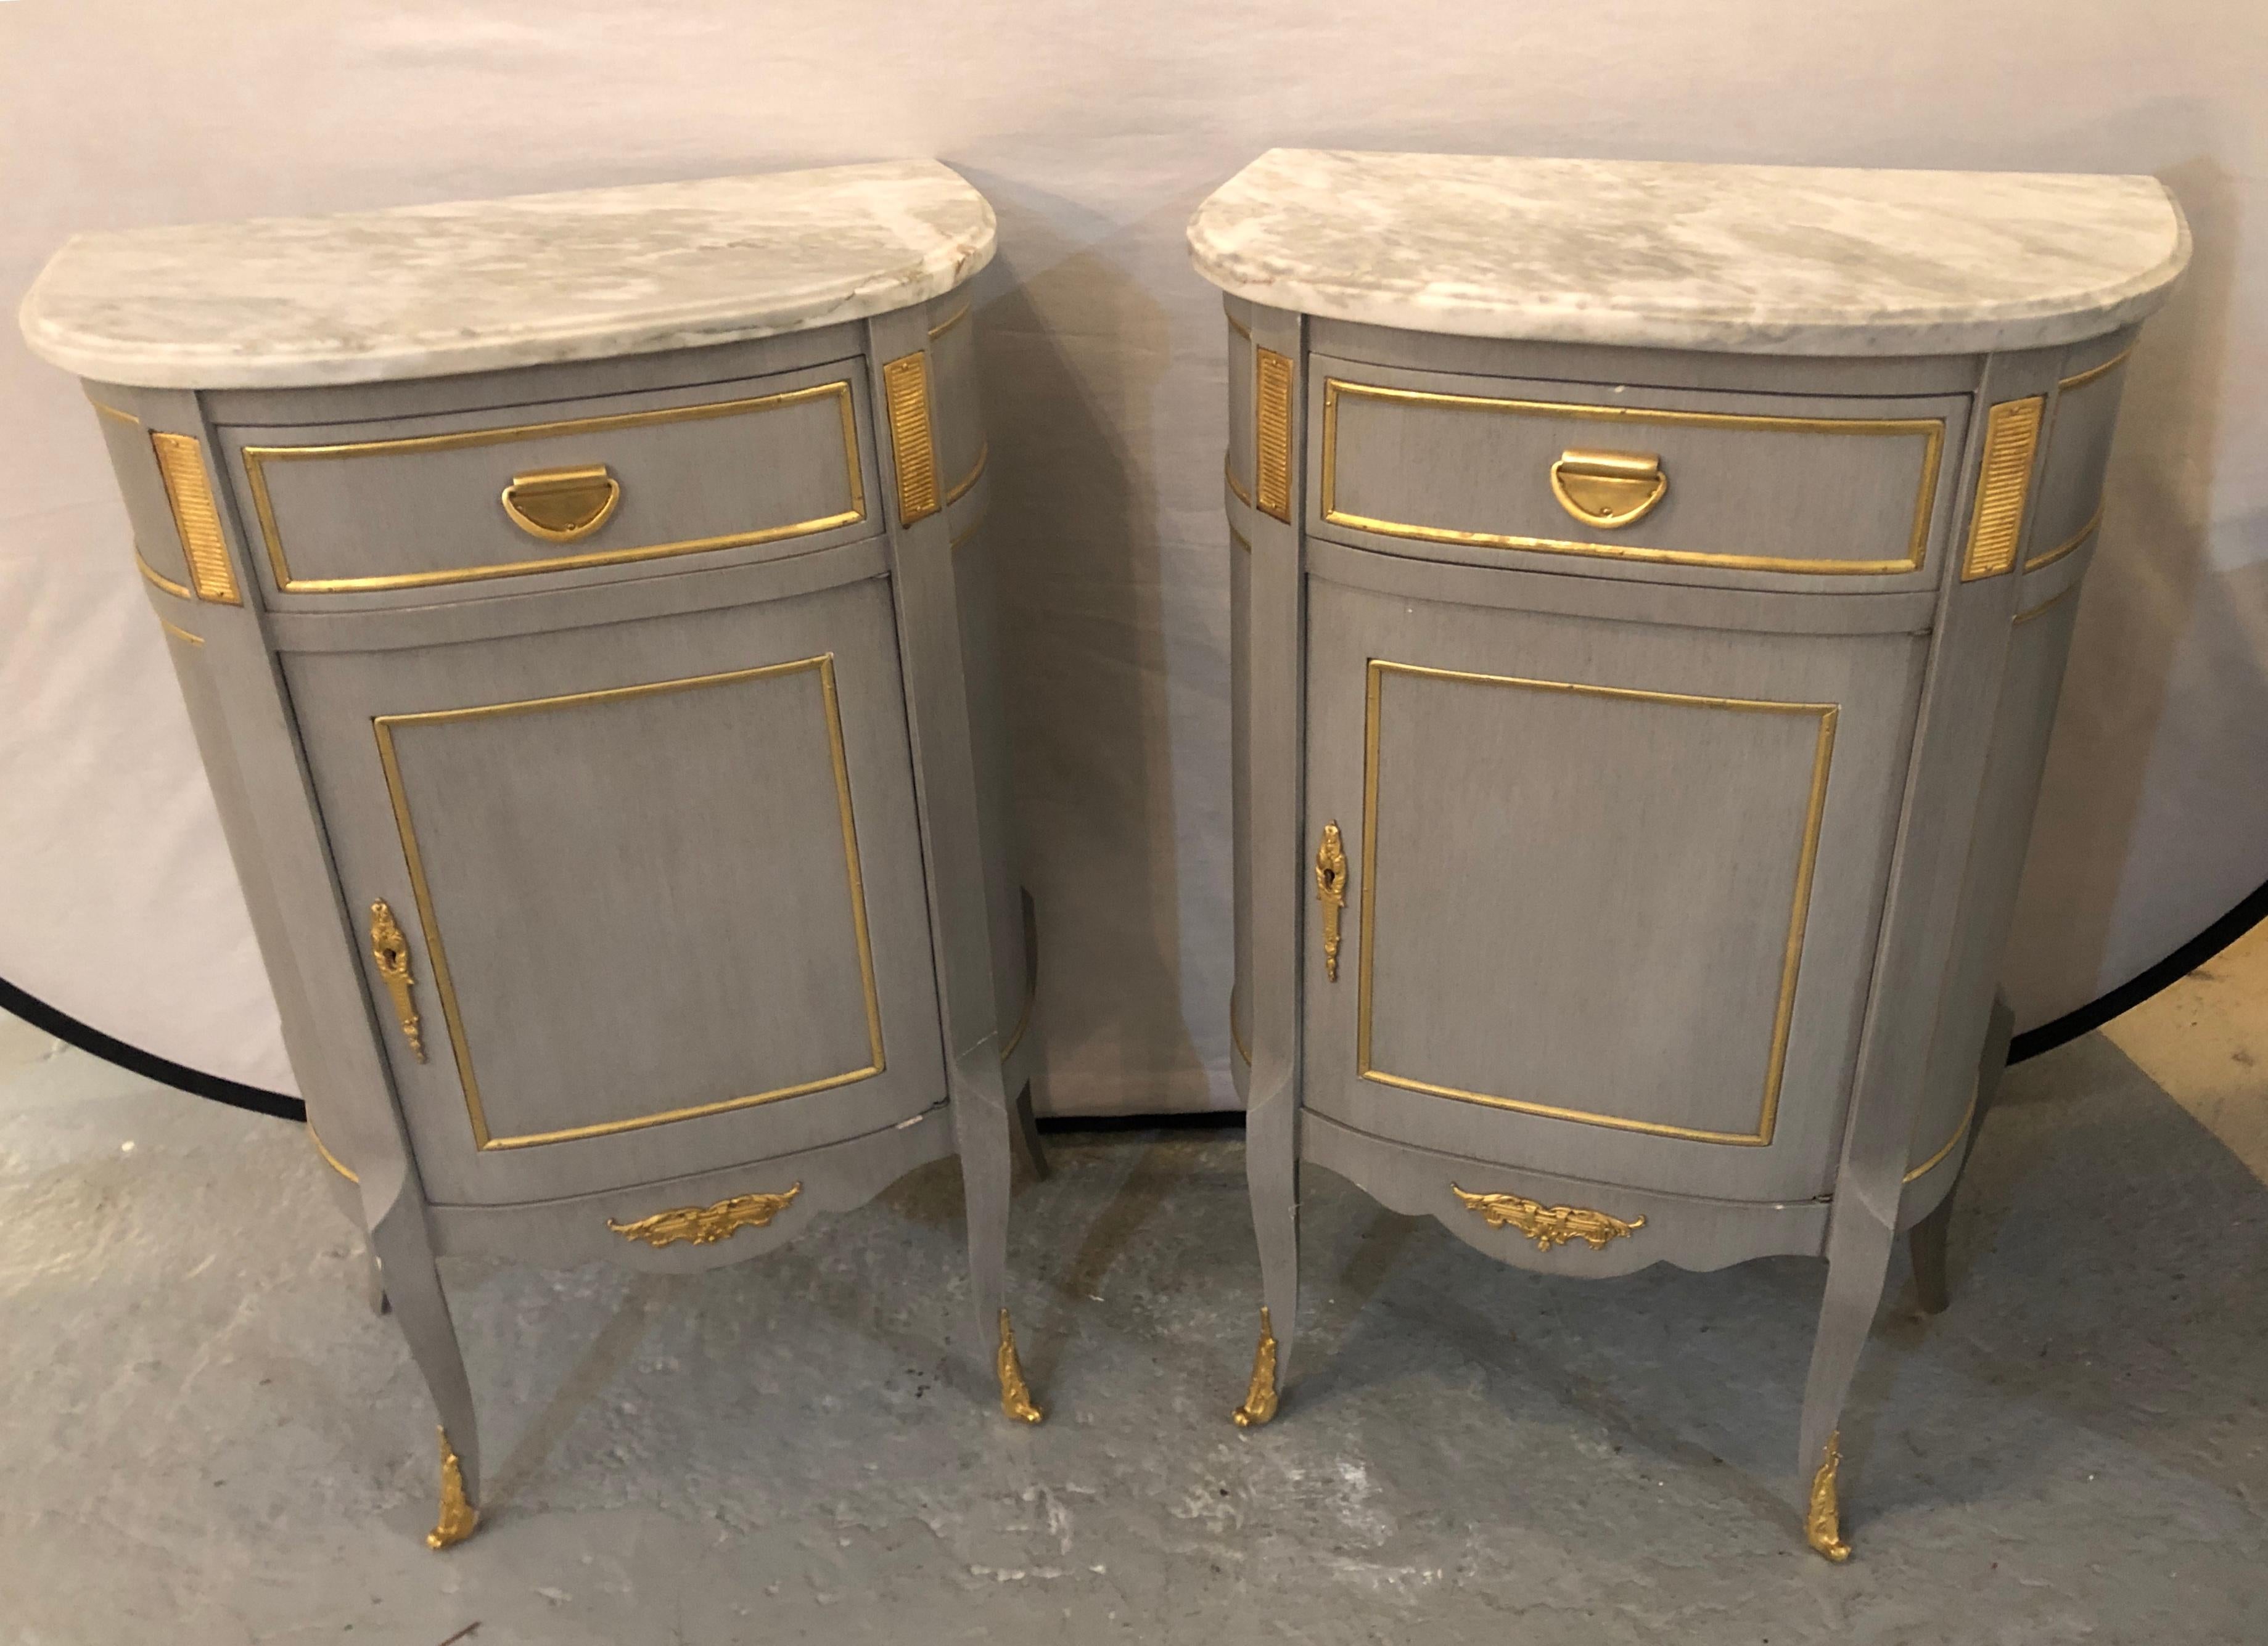 A finely constructed pair of Grayish blue painted marble top Louis XV style nightstands, Side tables or/ end tables. Each in the Louis XV style with bronze mounts and marble tops. The Demilune painted cabinets with a single shelved door under one